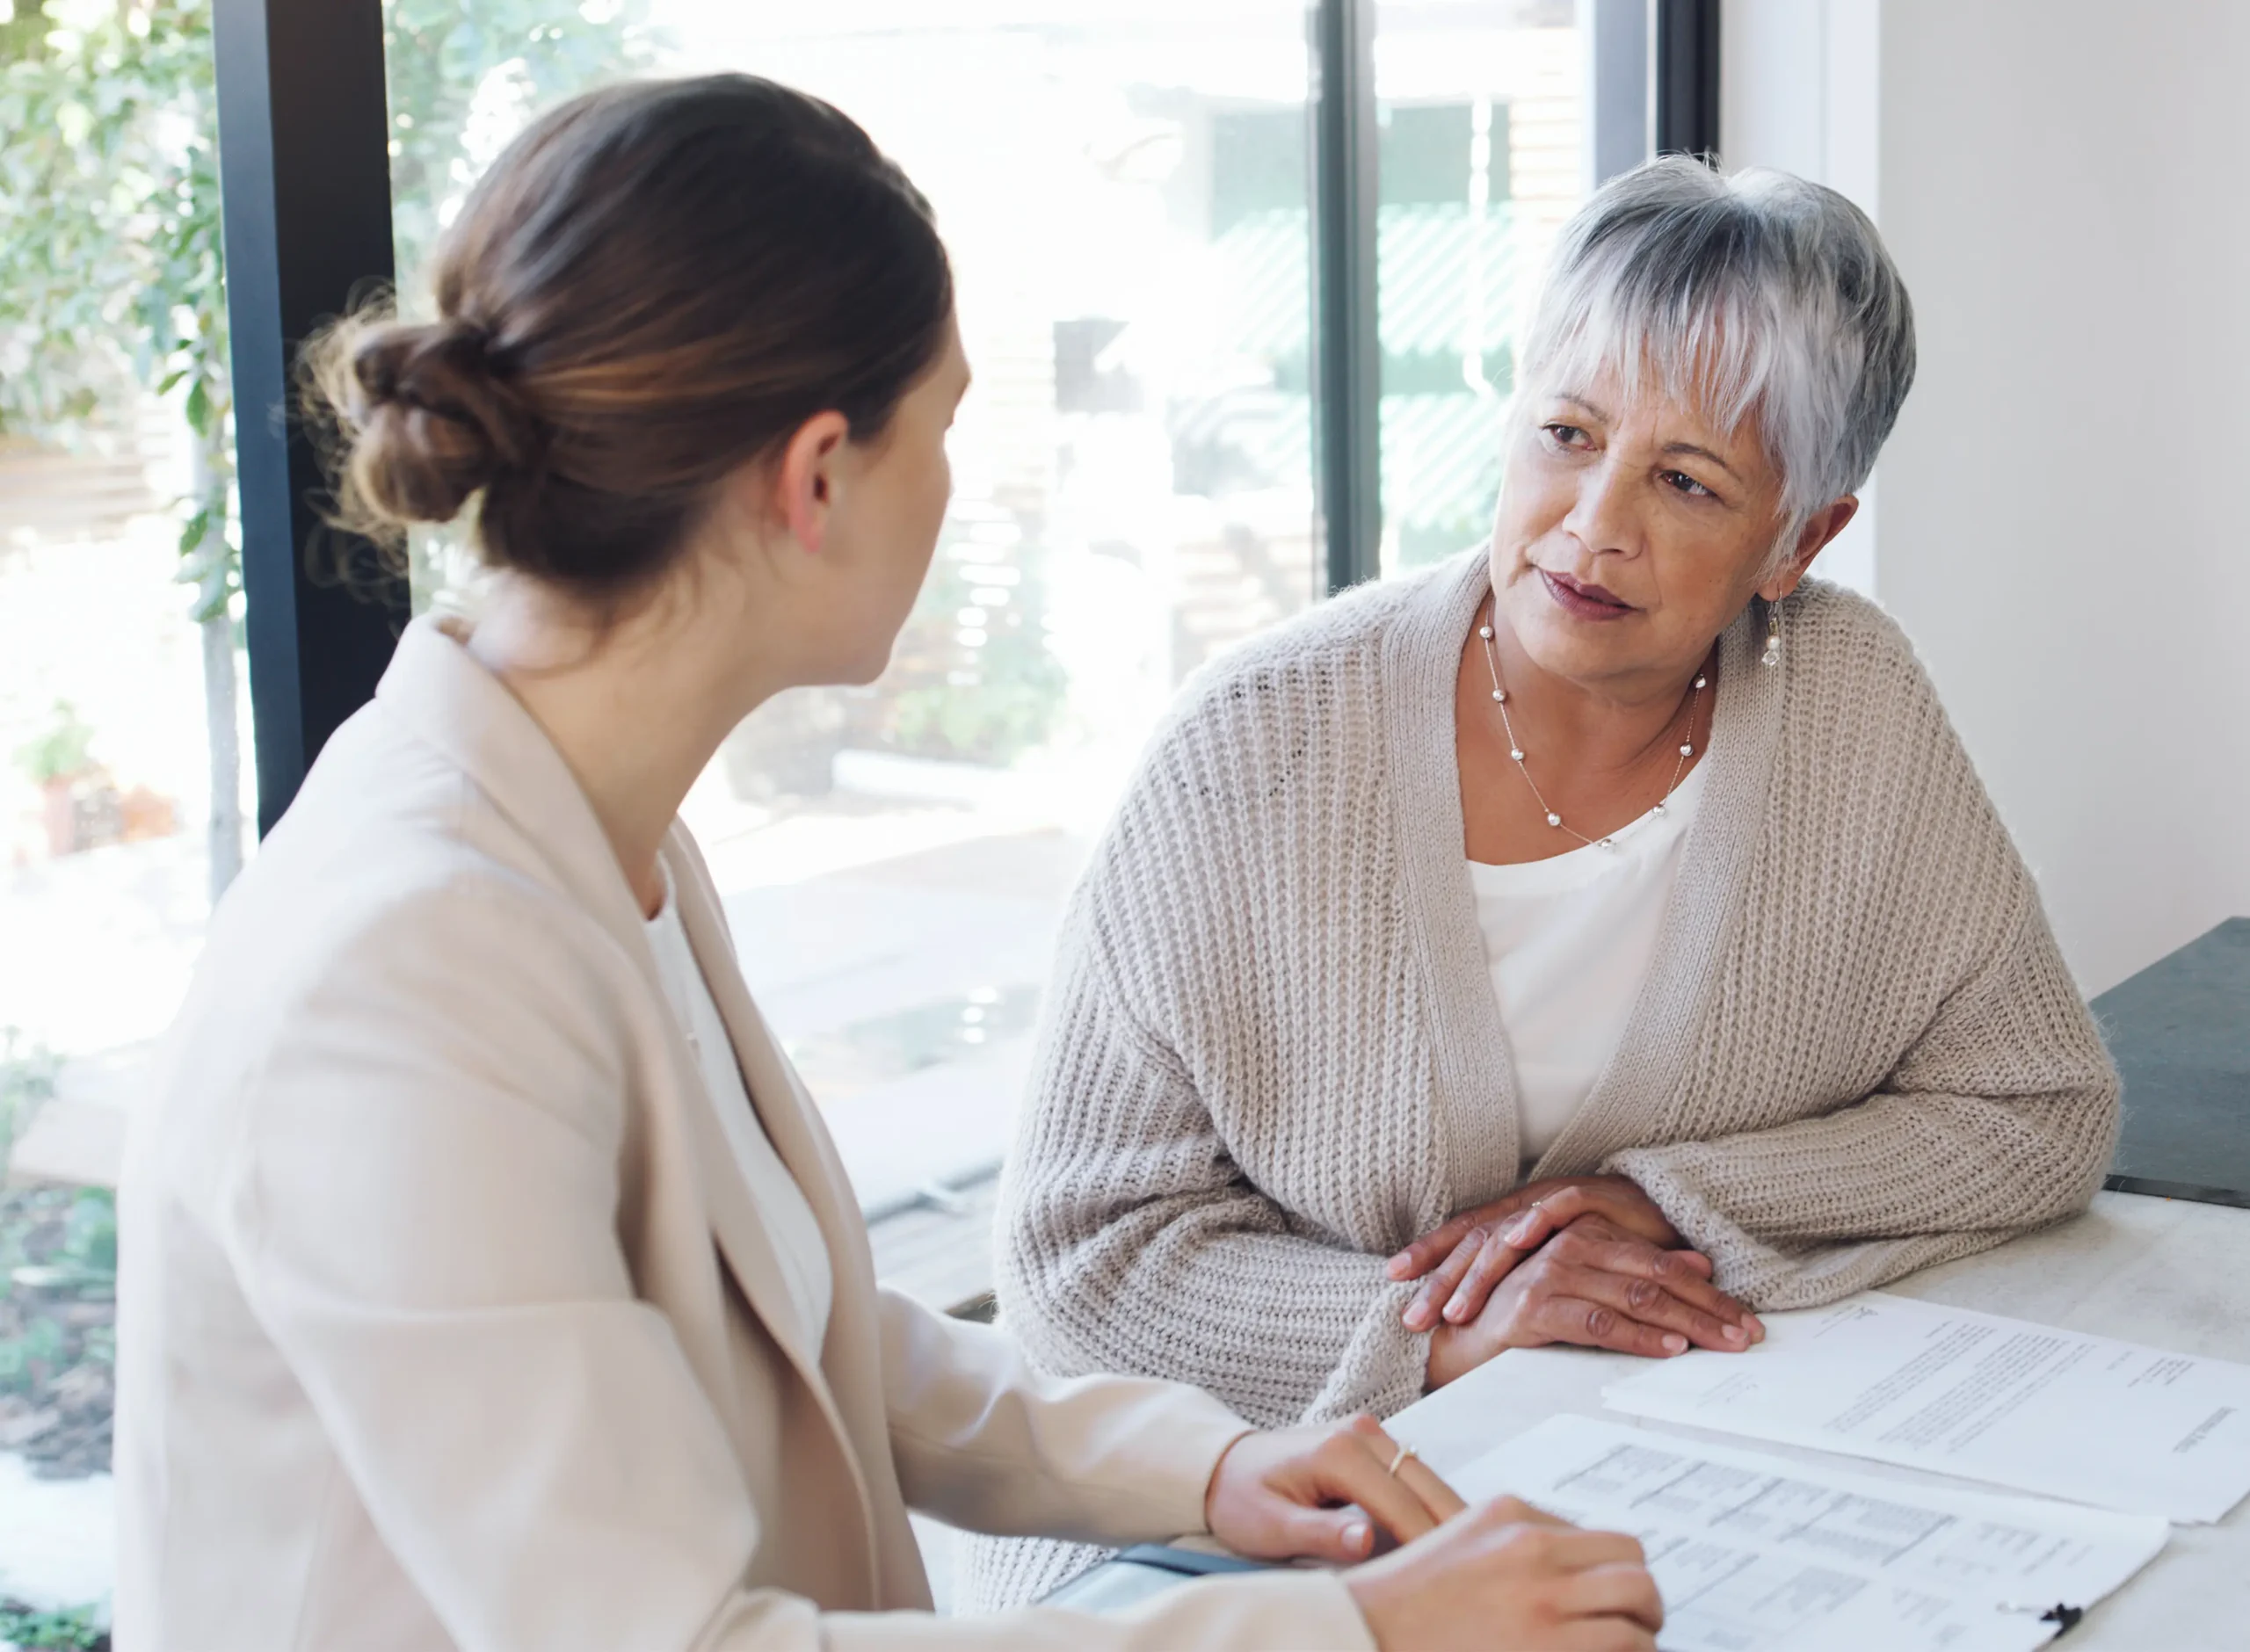 Senior woman consulting with a younger woman